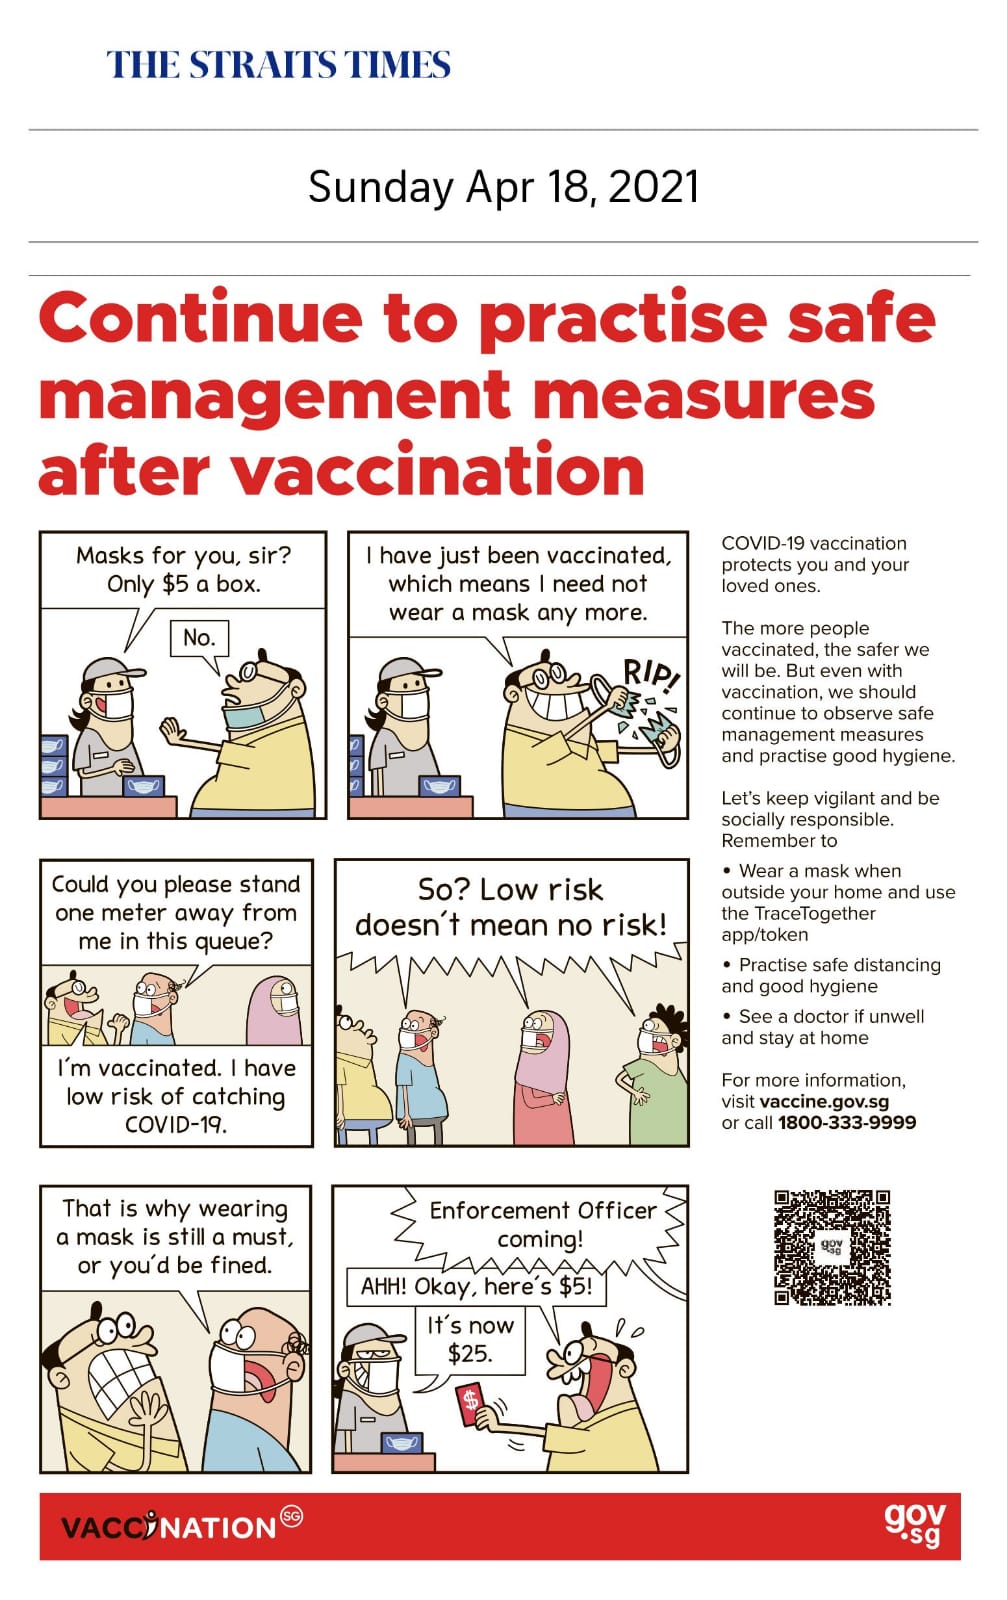 Continue to Practice Safe Management Measures After Vaccination - Published in The Straits Times April 18, 2021